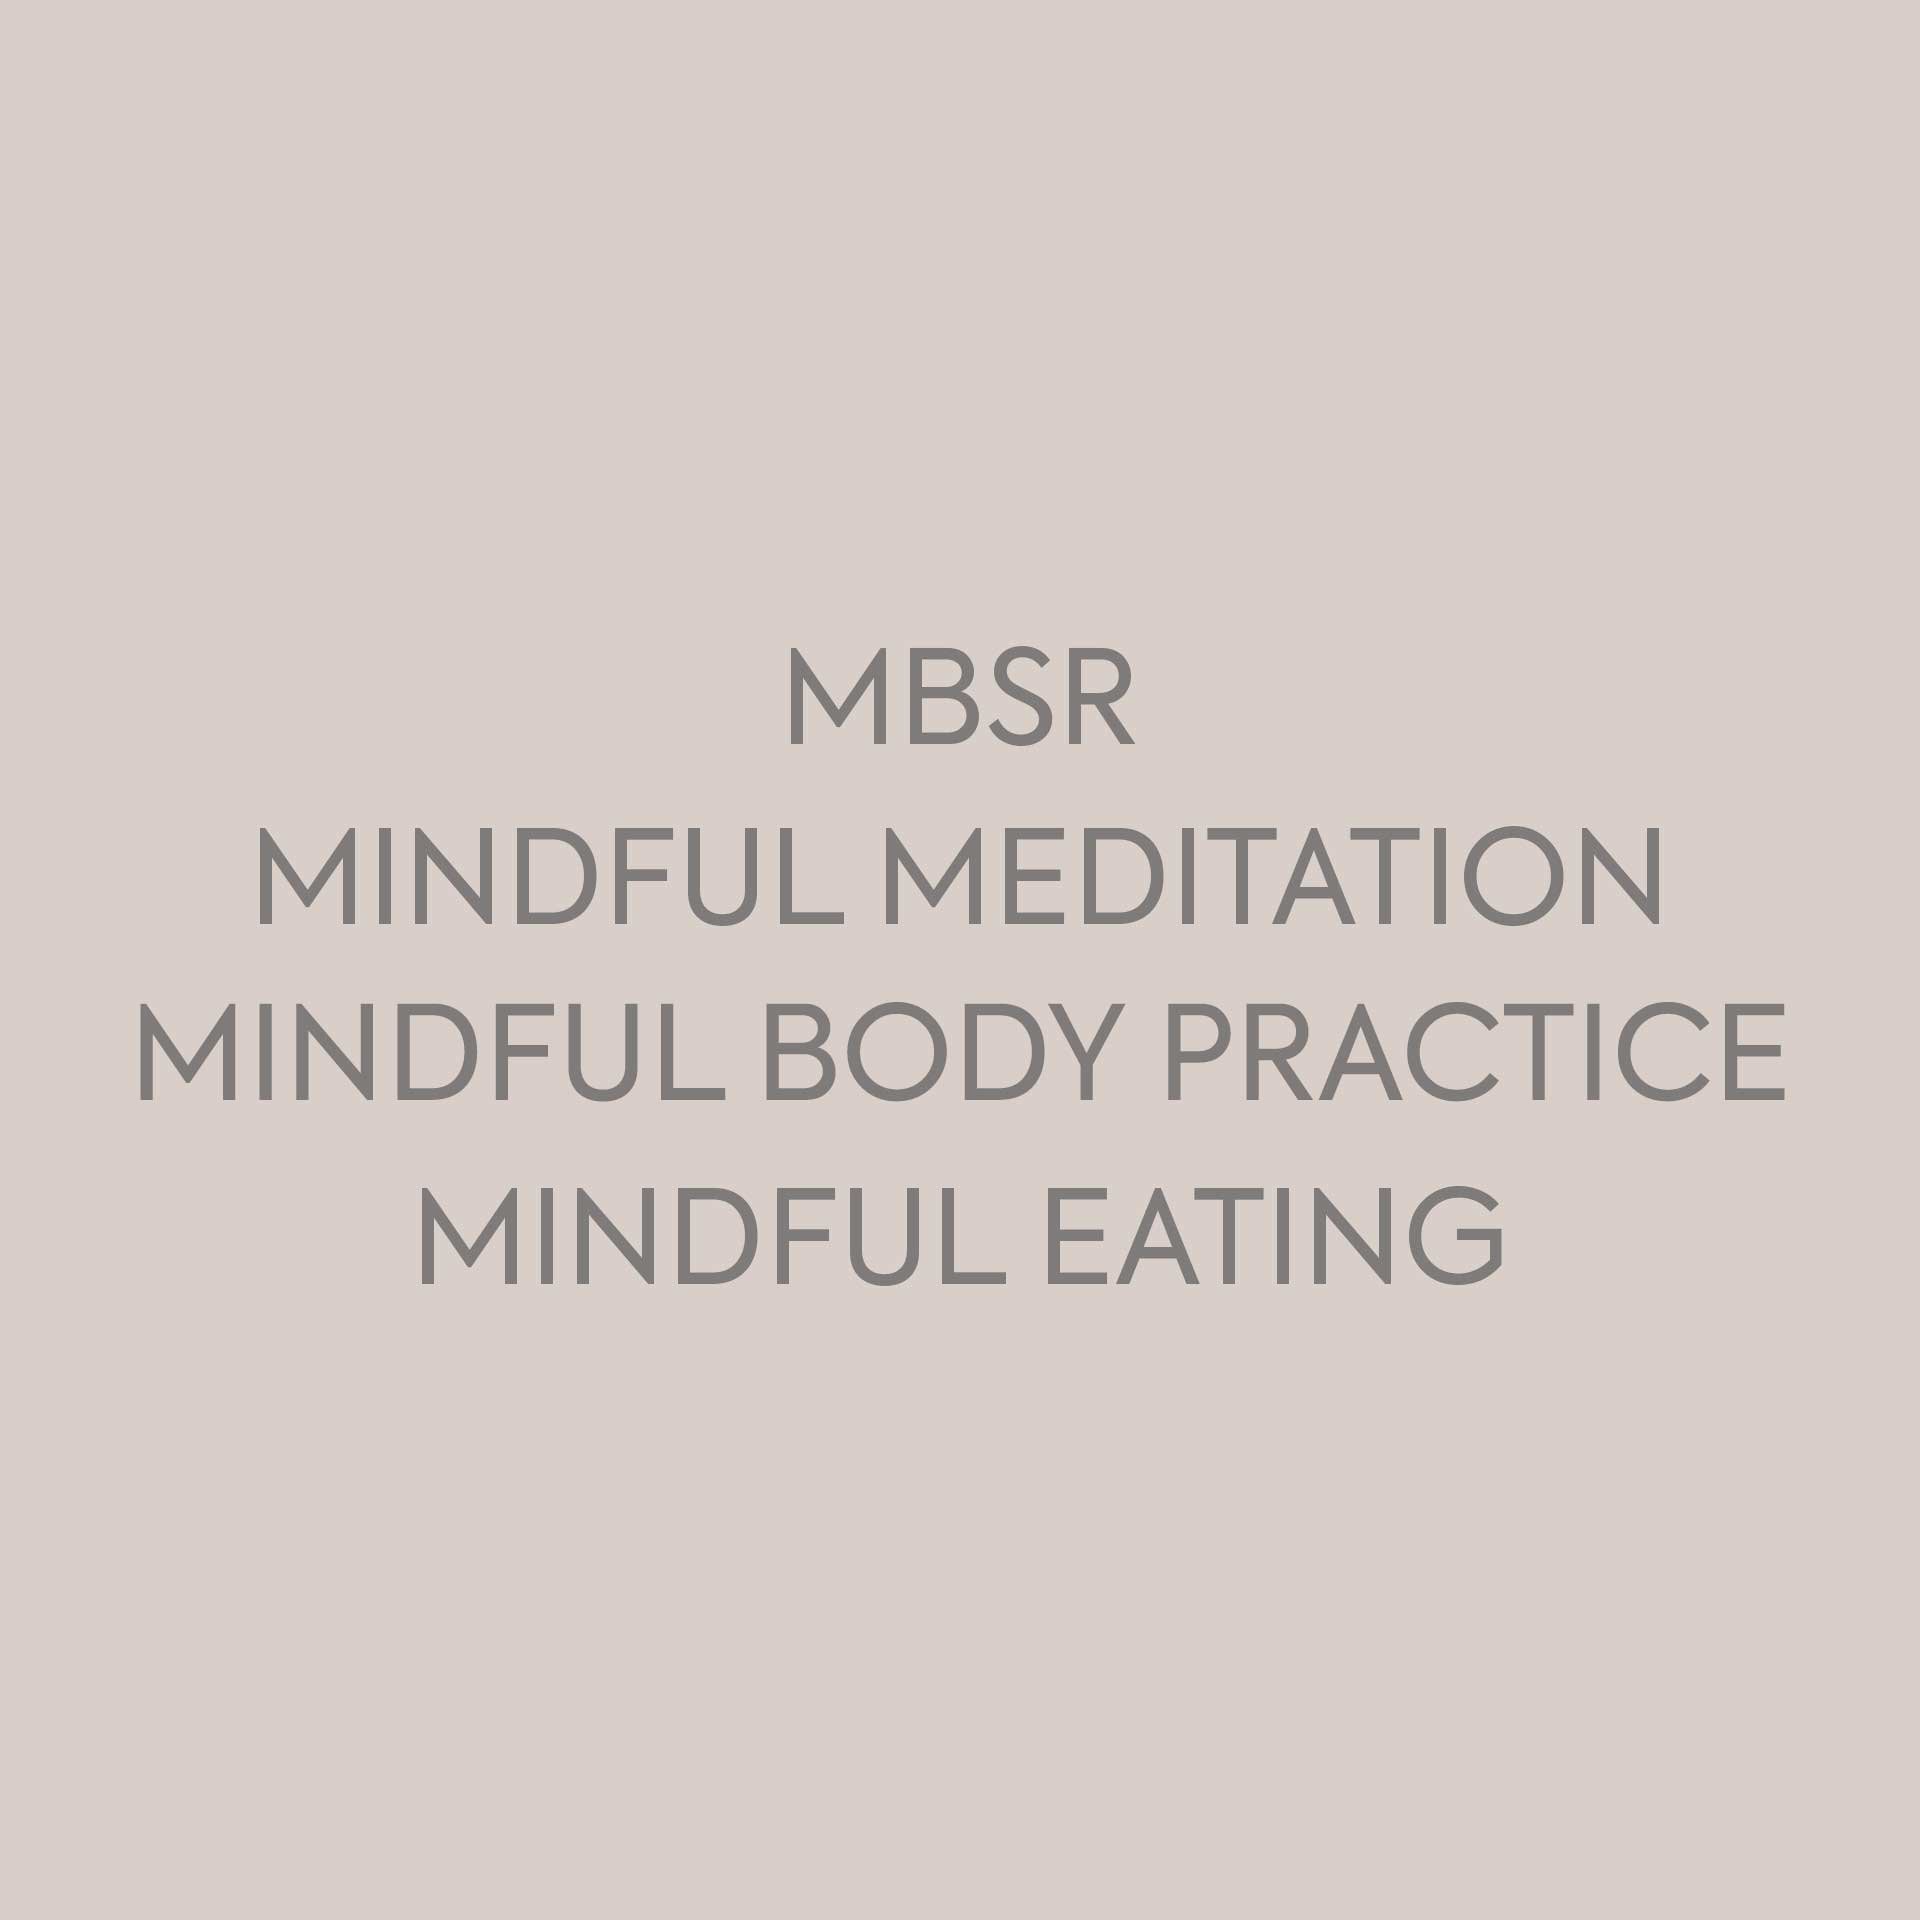 mbsr-mindful-meditation-yogatherapy-eating-the-practice-vienna.jpg